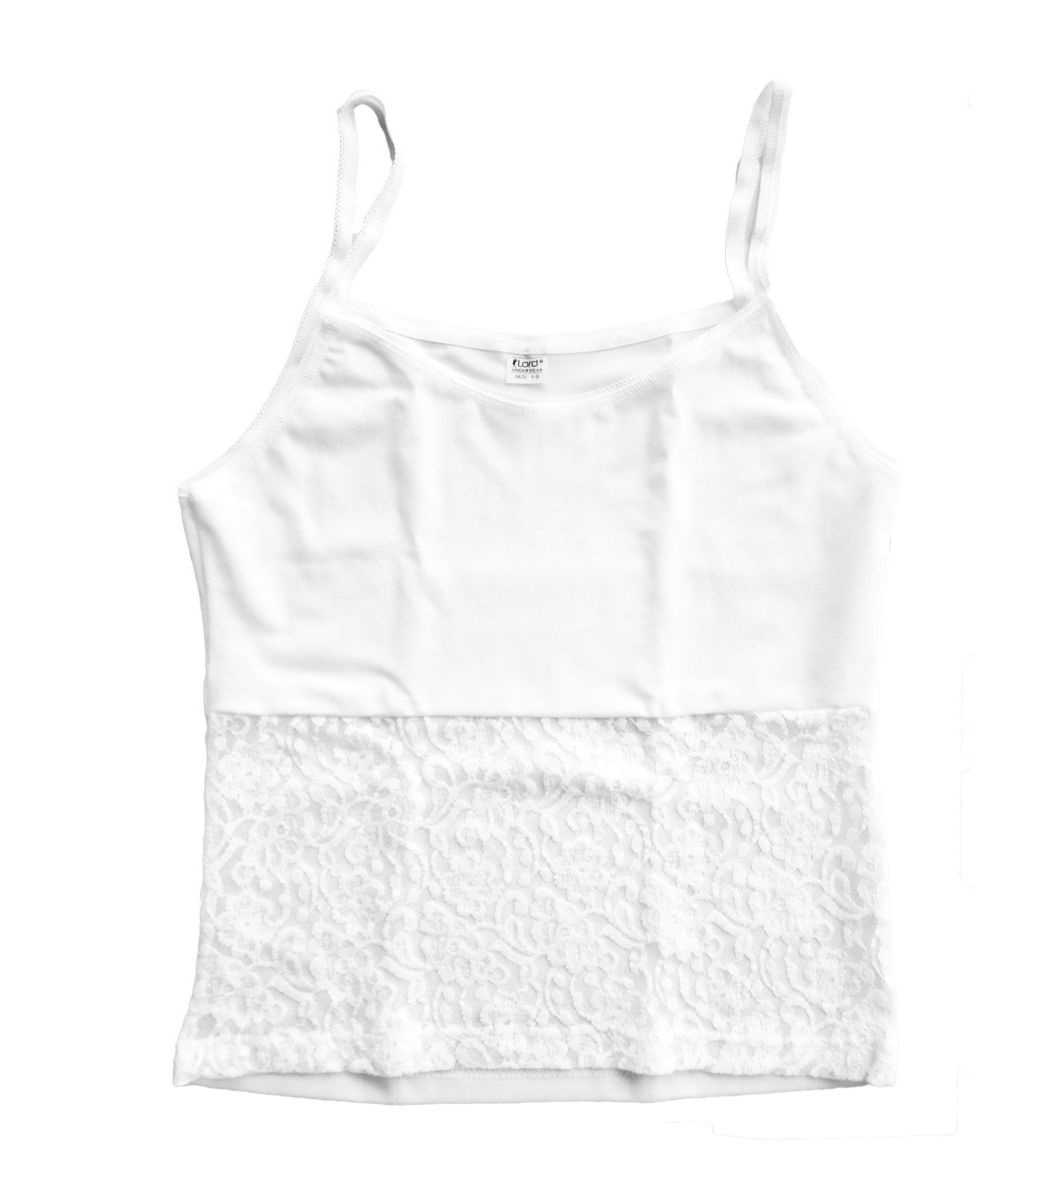 Camisole, lace